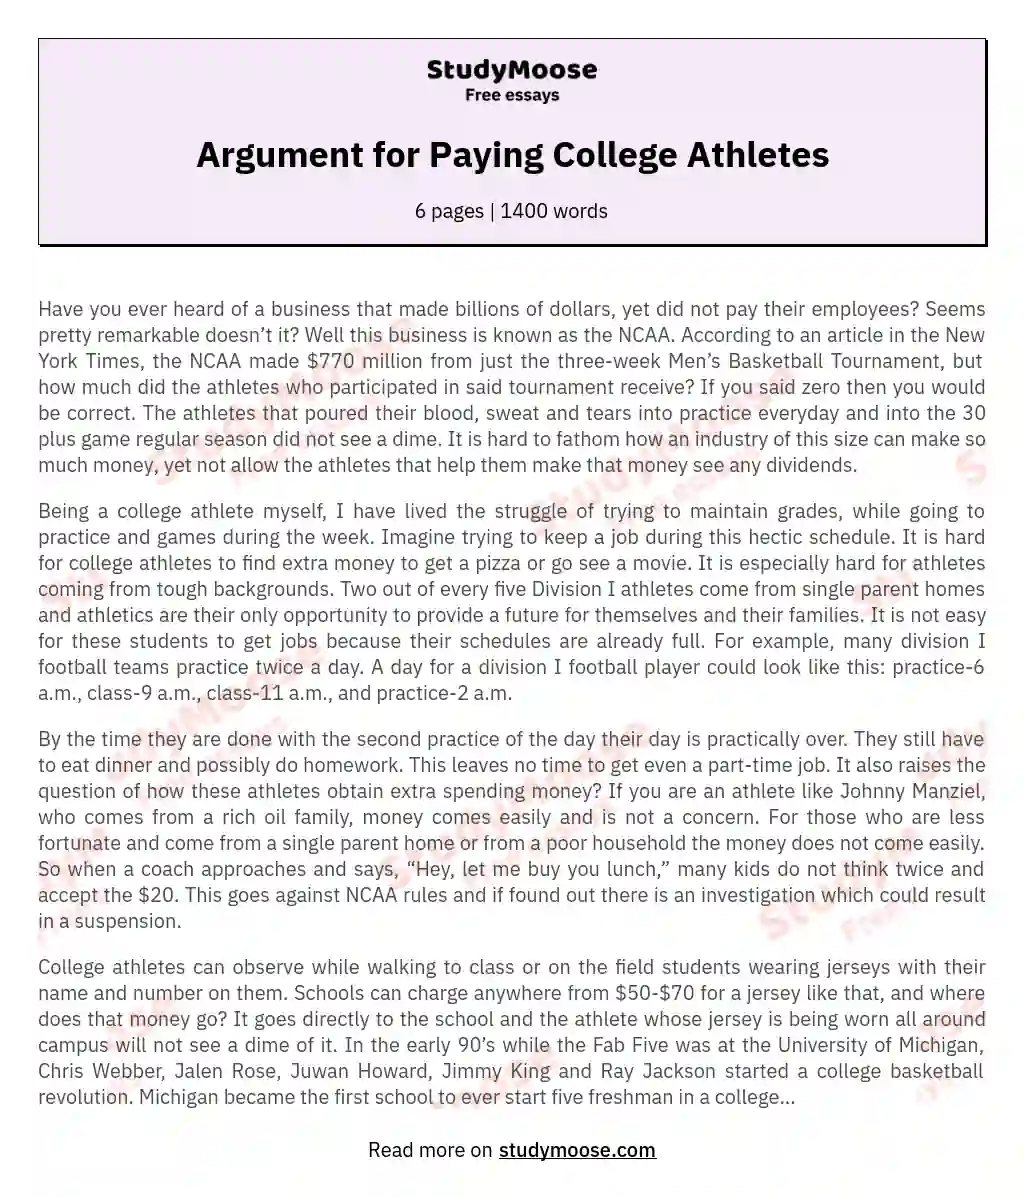 Argument for Paying College Athletes